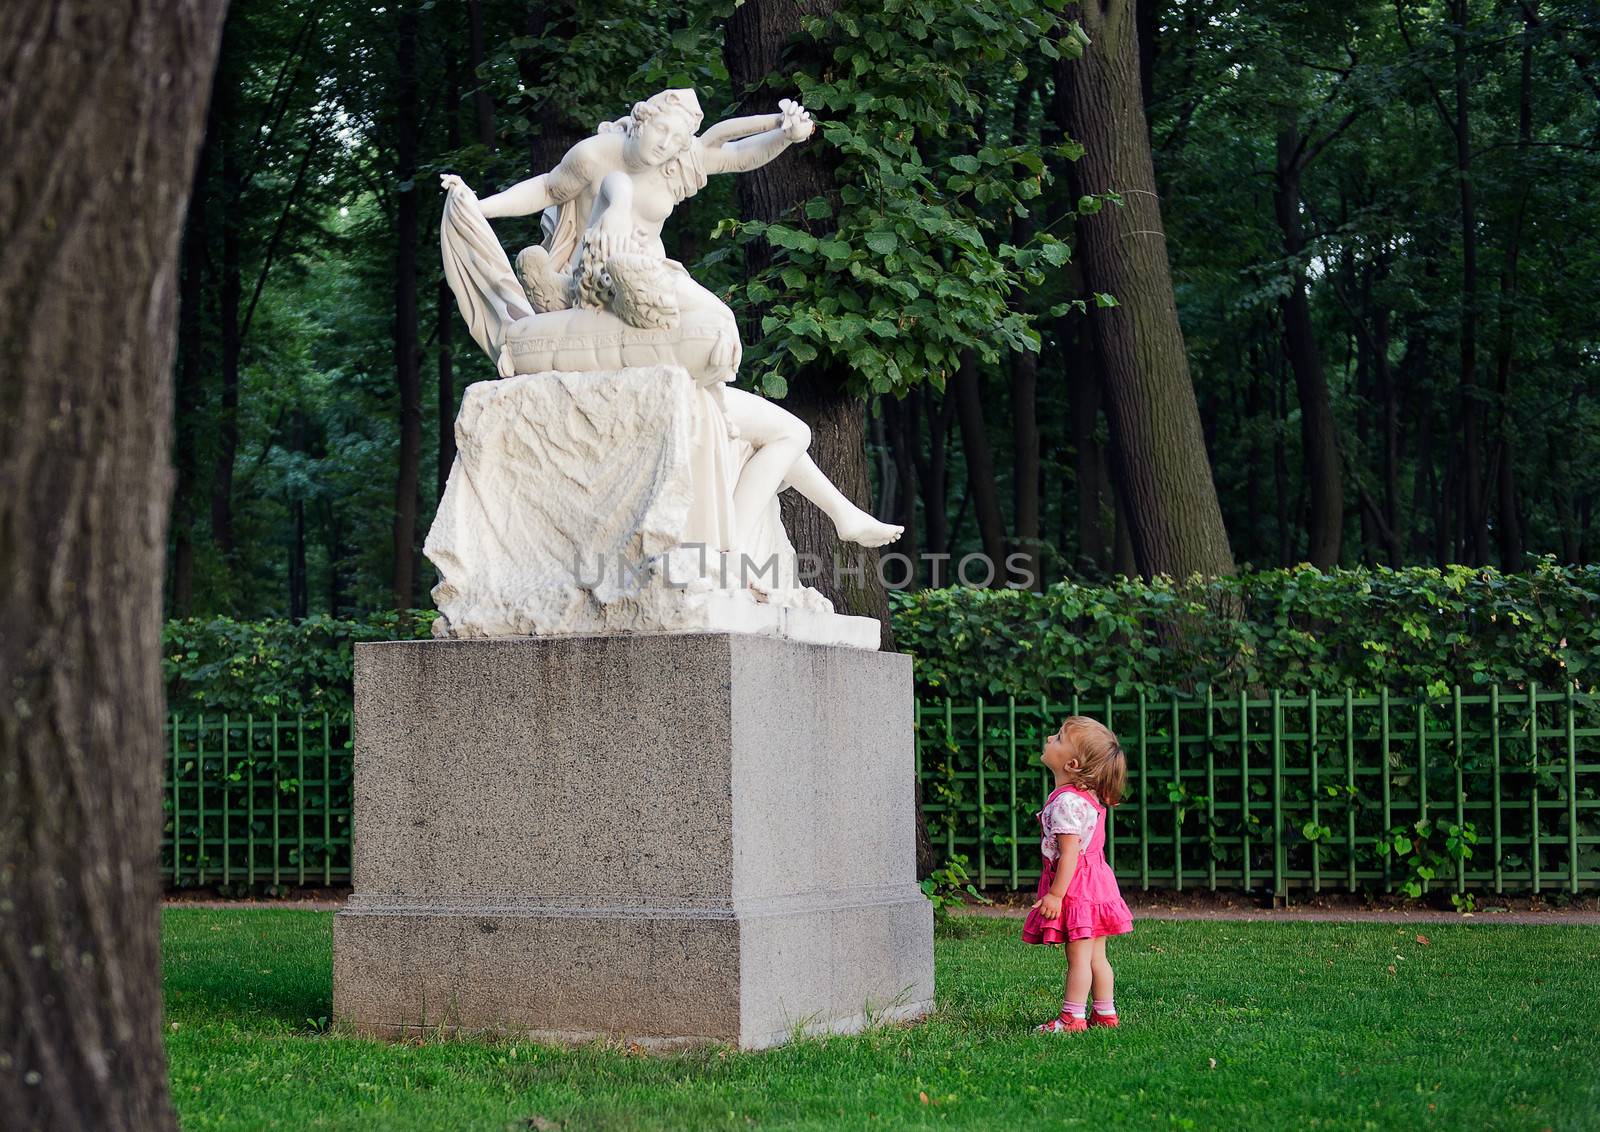 The little girl with astonishment looks at a sculpture of "Cupid and Psyche" in old park "Summer garden" in St.Petersburg, Russia 